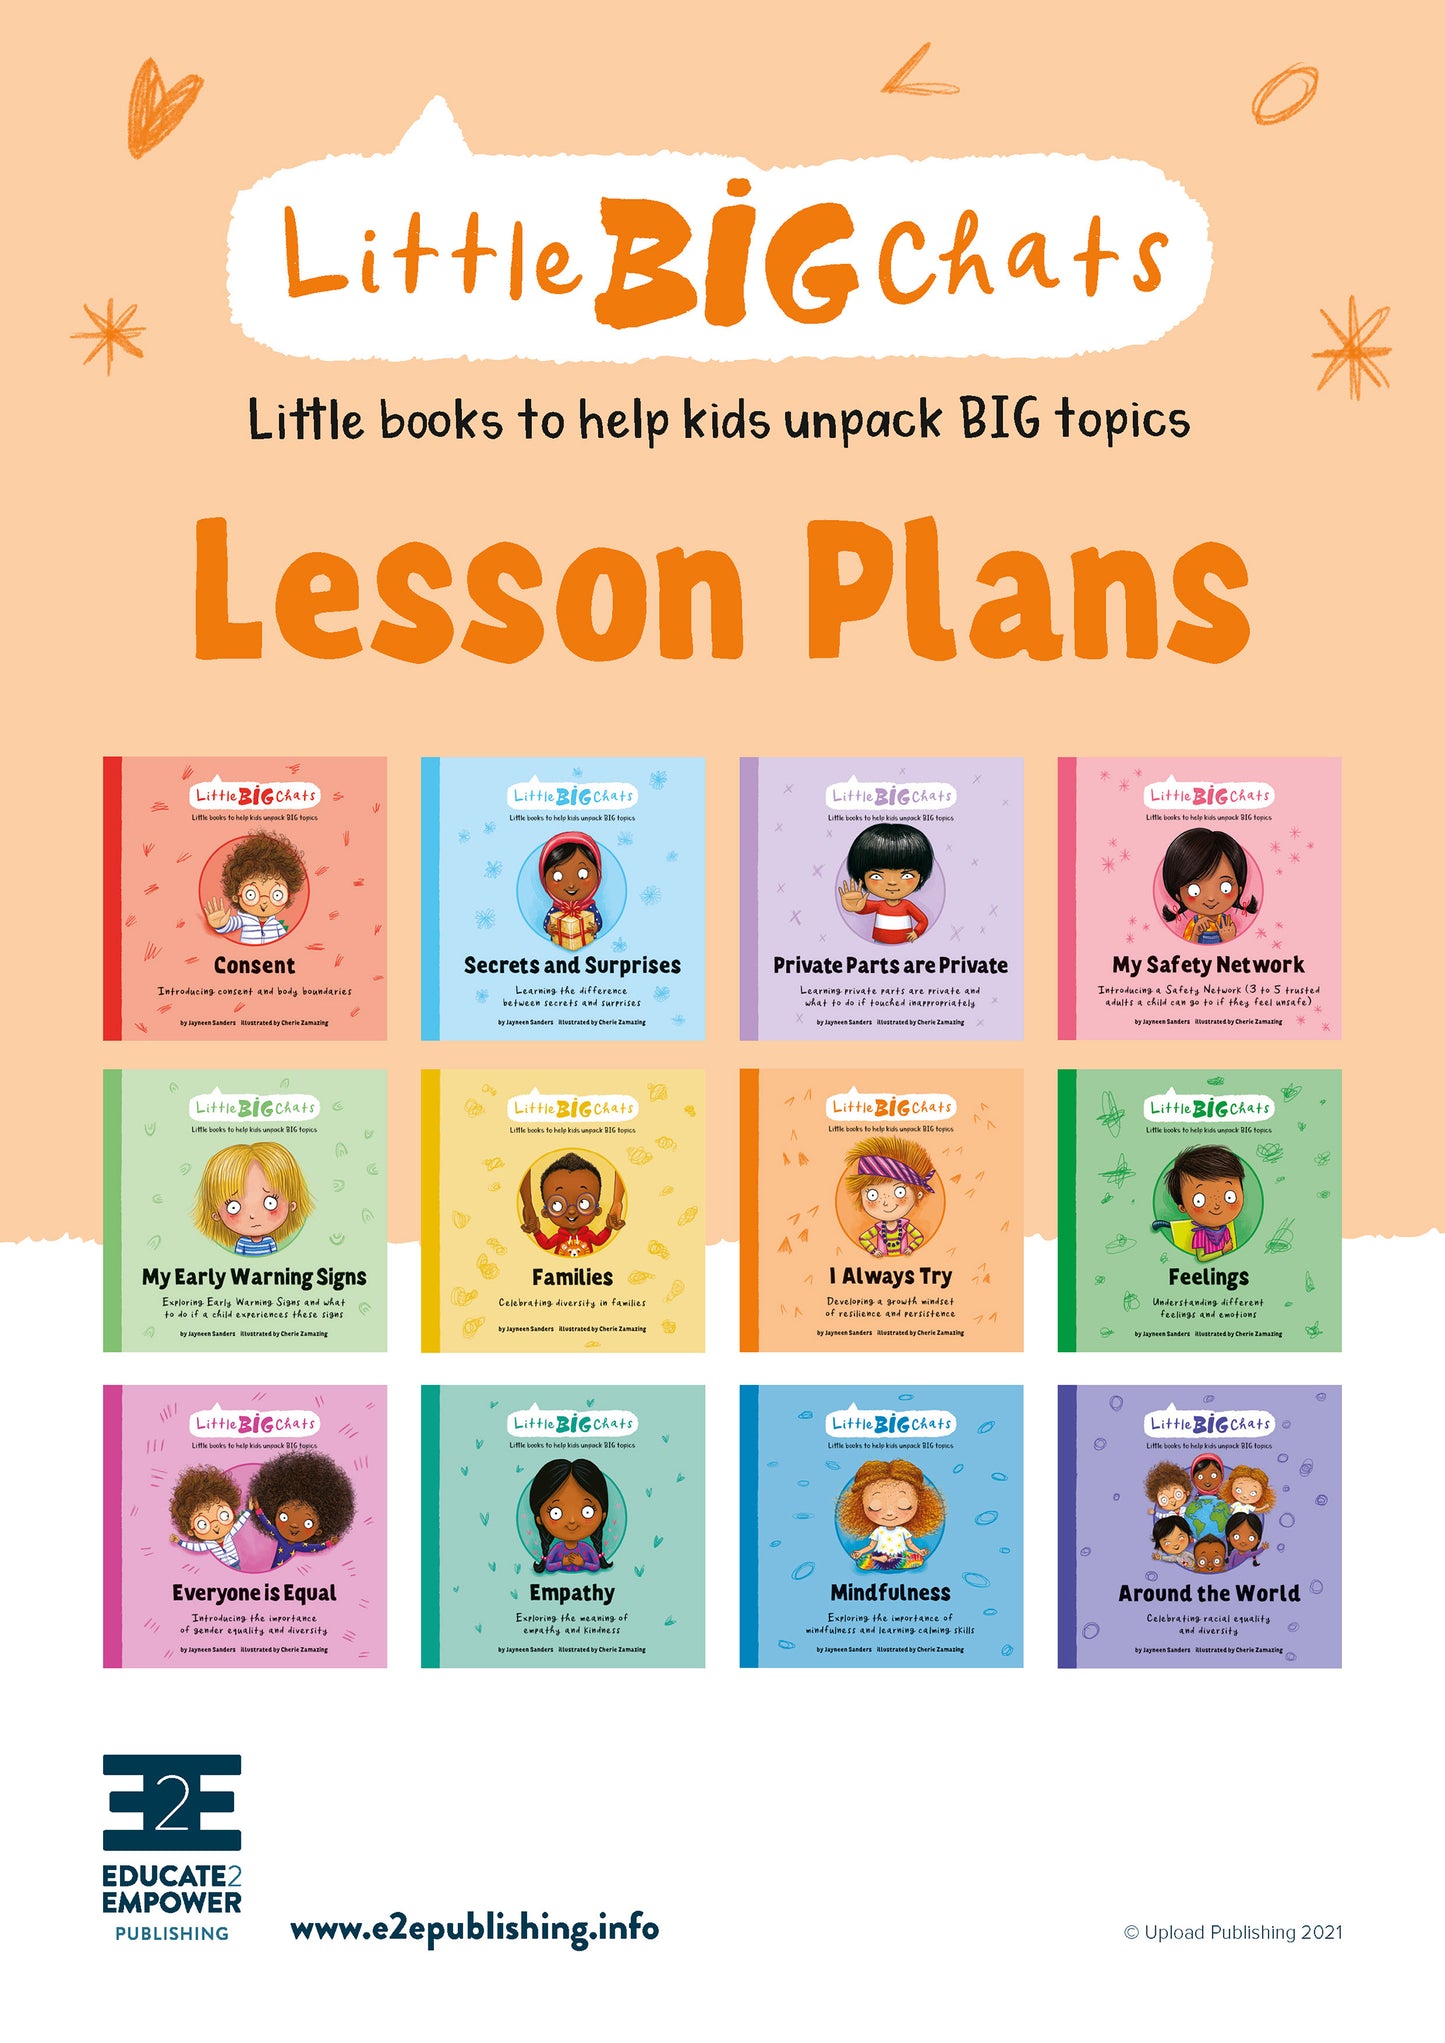 The cover of the Little BIG Chats lesson plans.